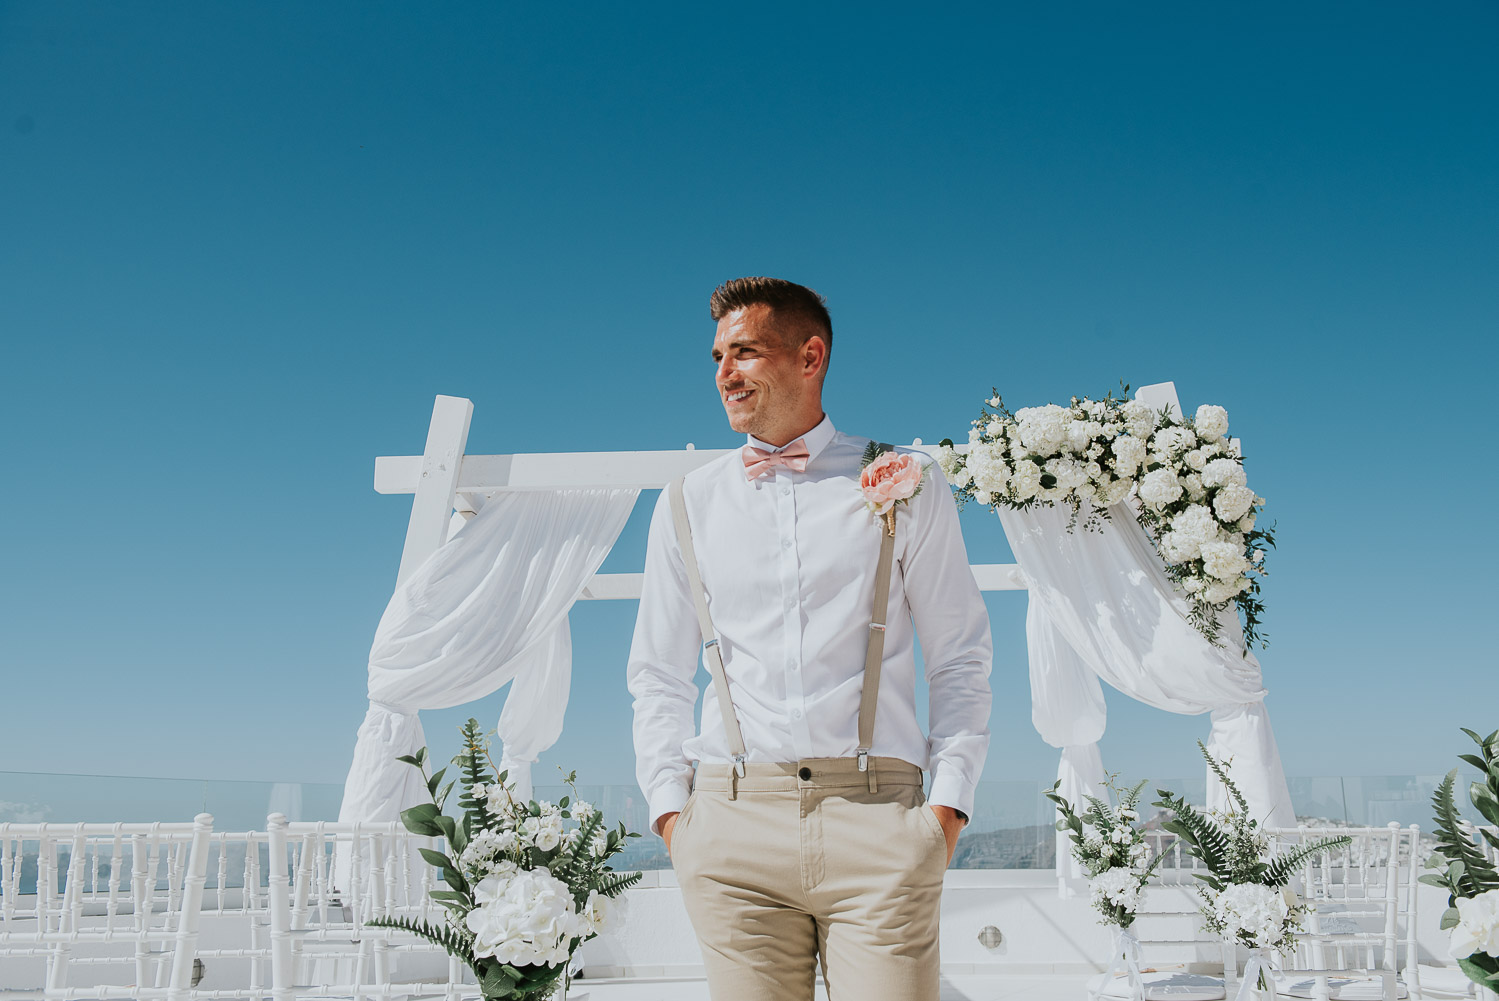 Wedding photographer Santorini: groom walking along the aisle with gazebo covered in flowers in the background by Ben and Vesna.